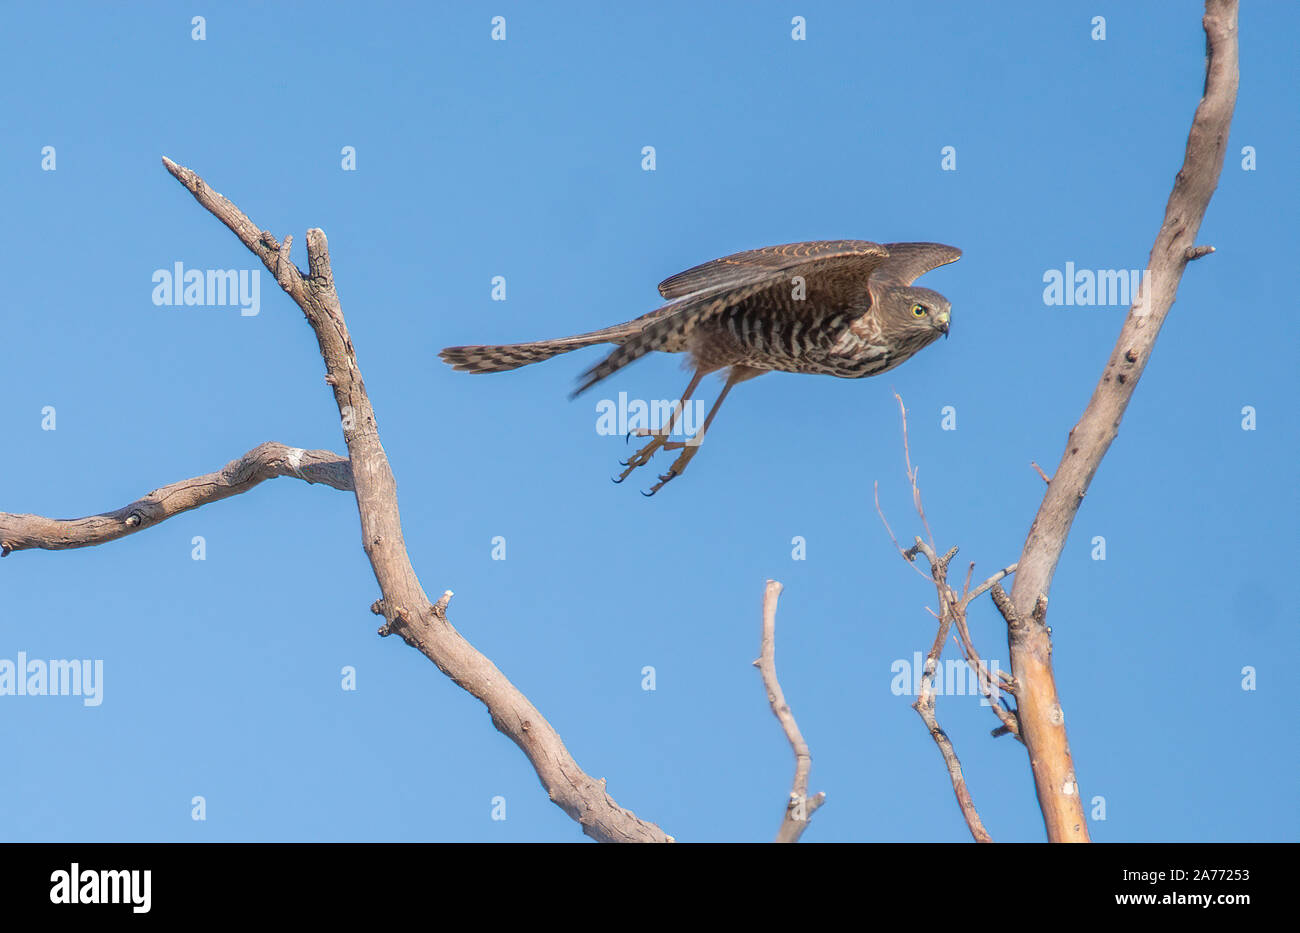 A Brown Goshawk caught as it launched itself from the top of a tree against a clear blue sky Stock Photo